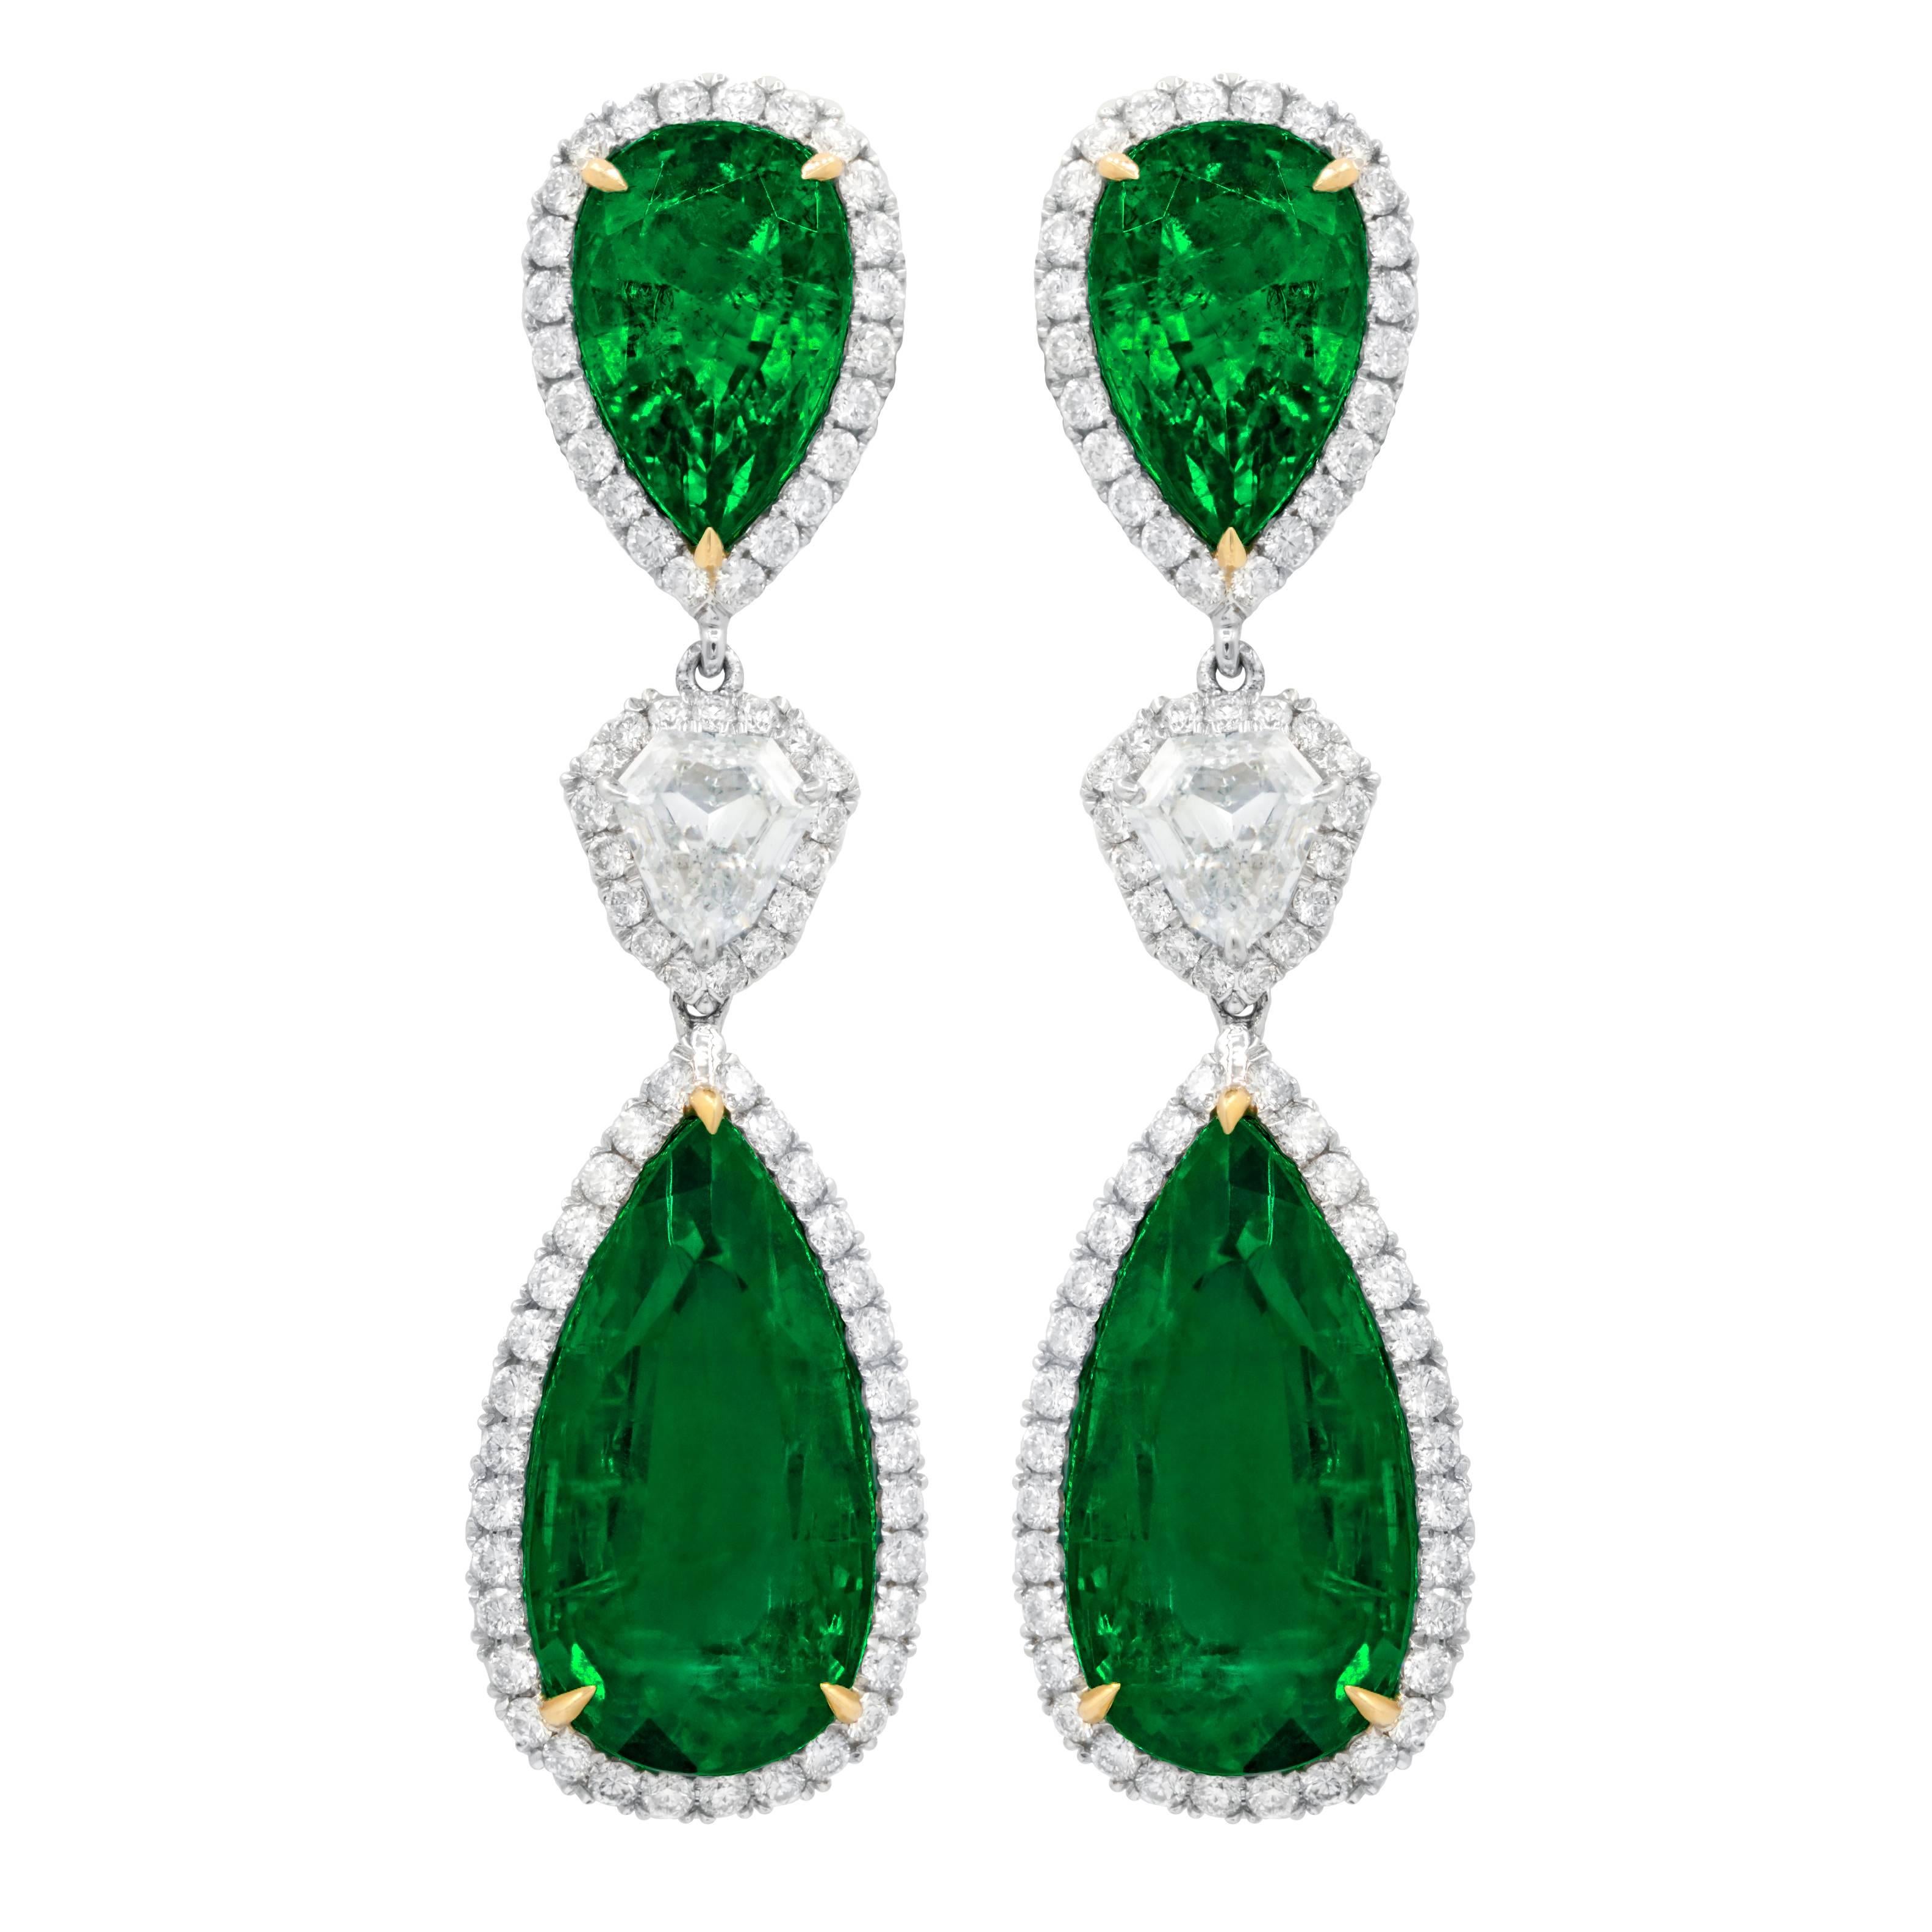 Platinum Drop Earrings with 21.41 Carat of GIA Certified Green Emeralds